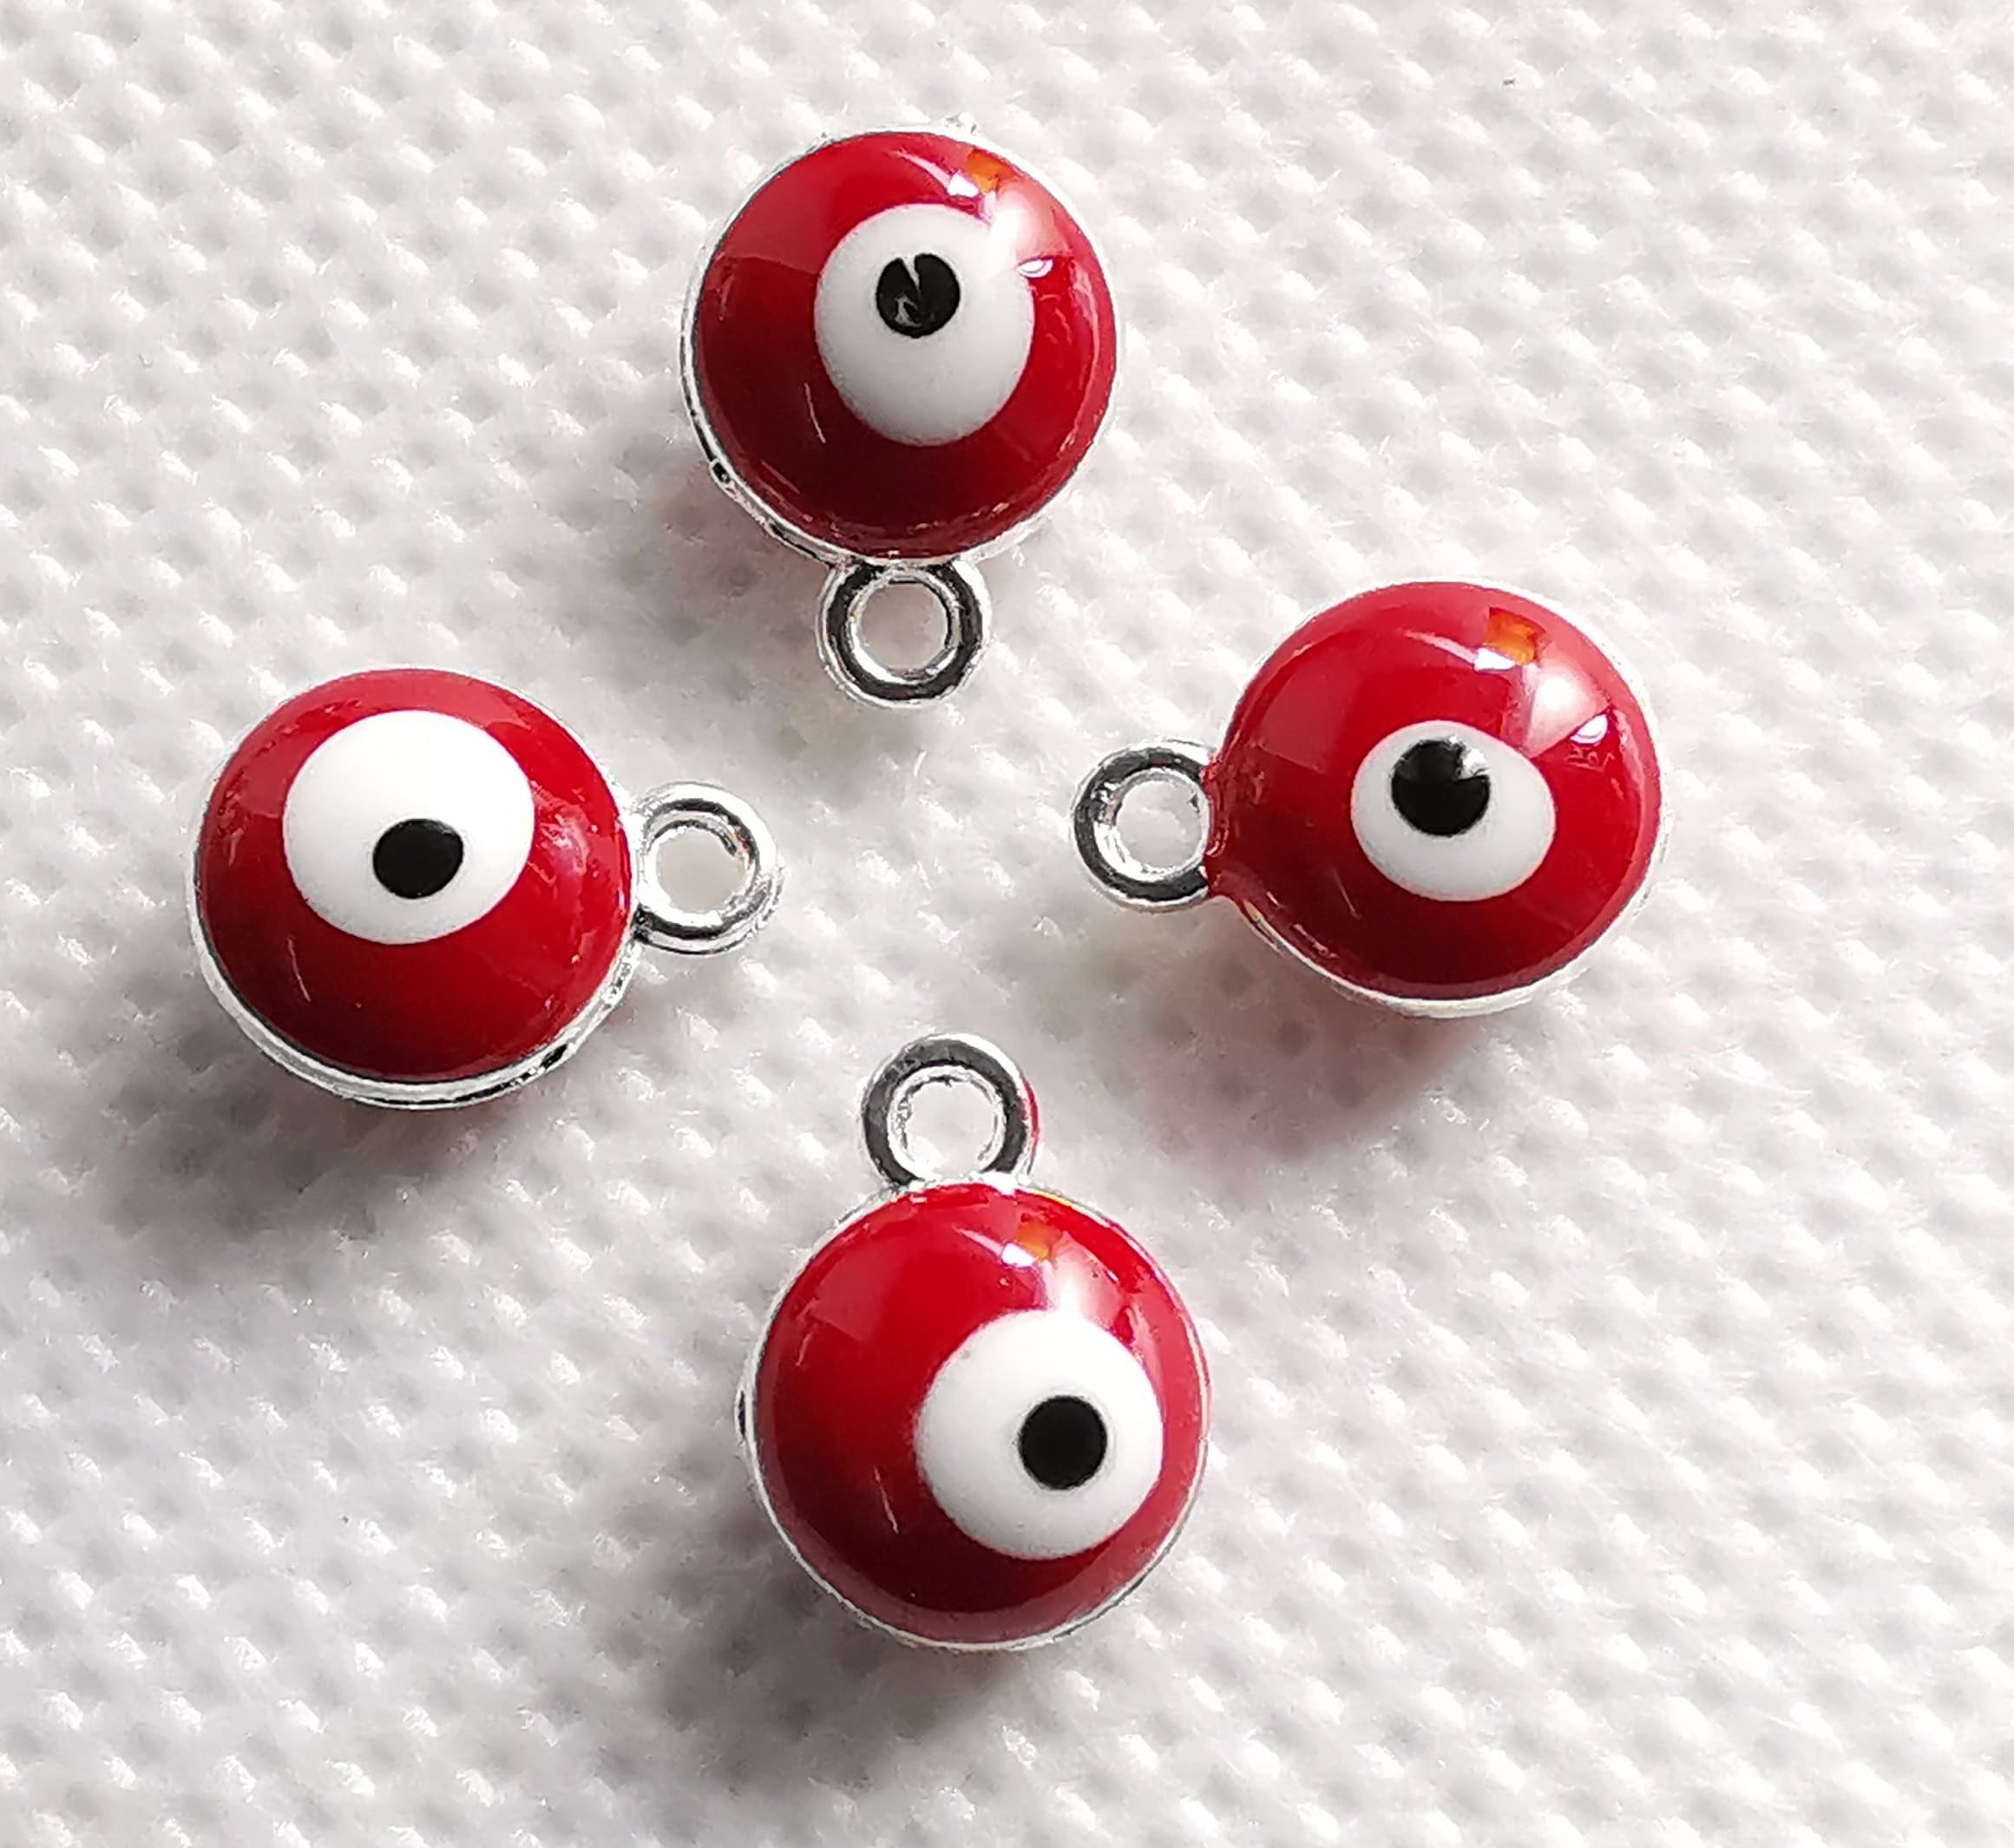 Evil Eye Jewelry 30pcs Double Sided Evil Eye Charms 8x11 mm Turkish Eye,DIY Jewelry Supply Red Evil Eye Charms Wholesale Charms